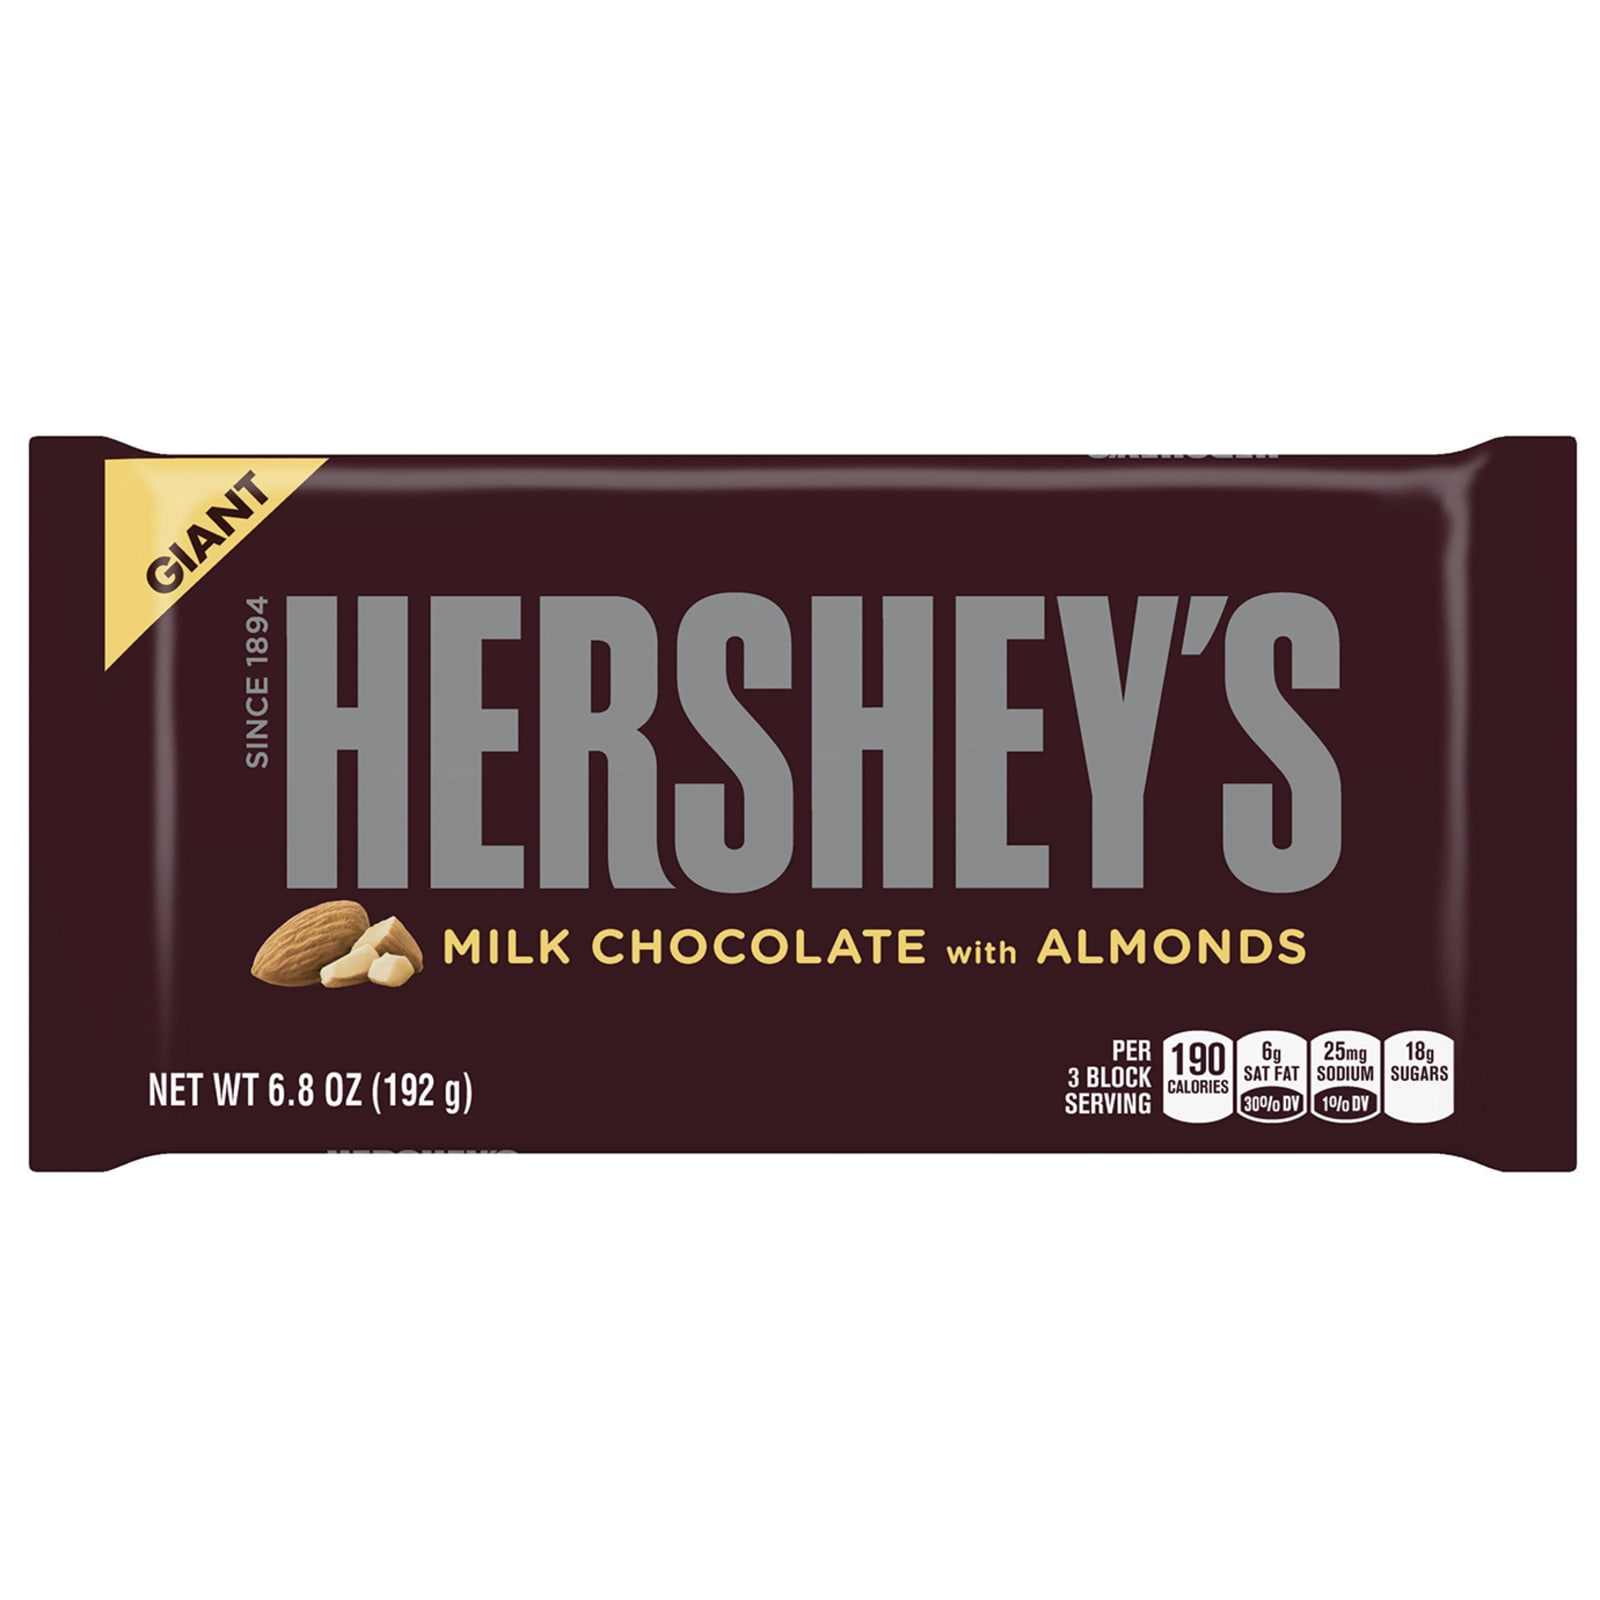 Hershey replaces milk solids with roasted grain flour for improved  dairy-free chocolate